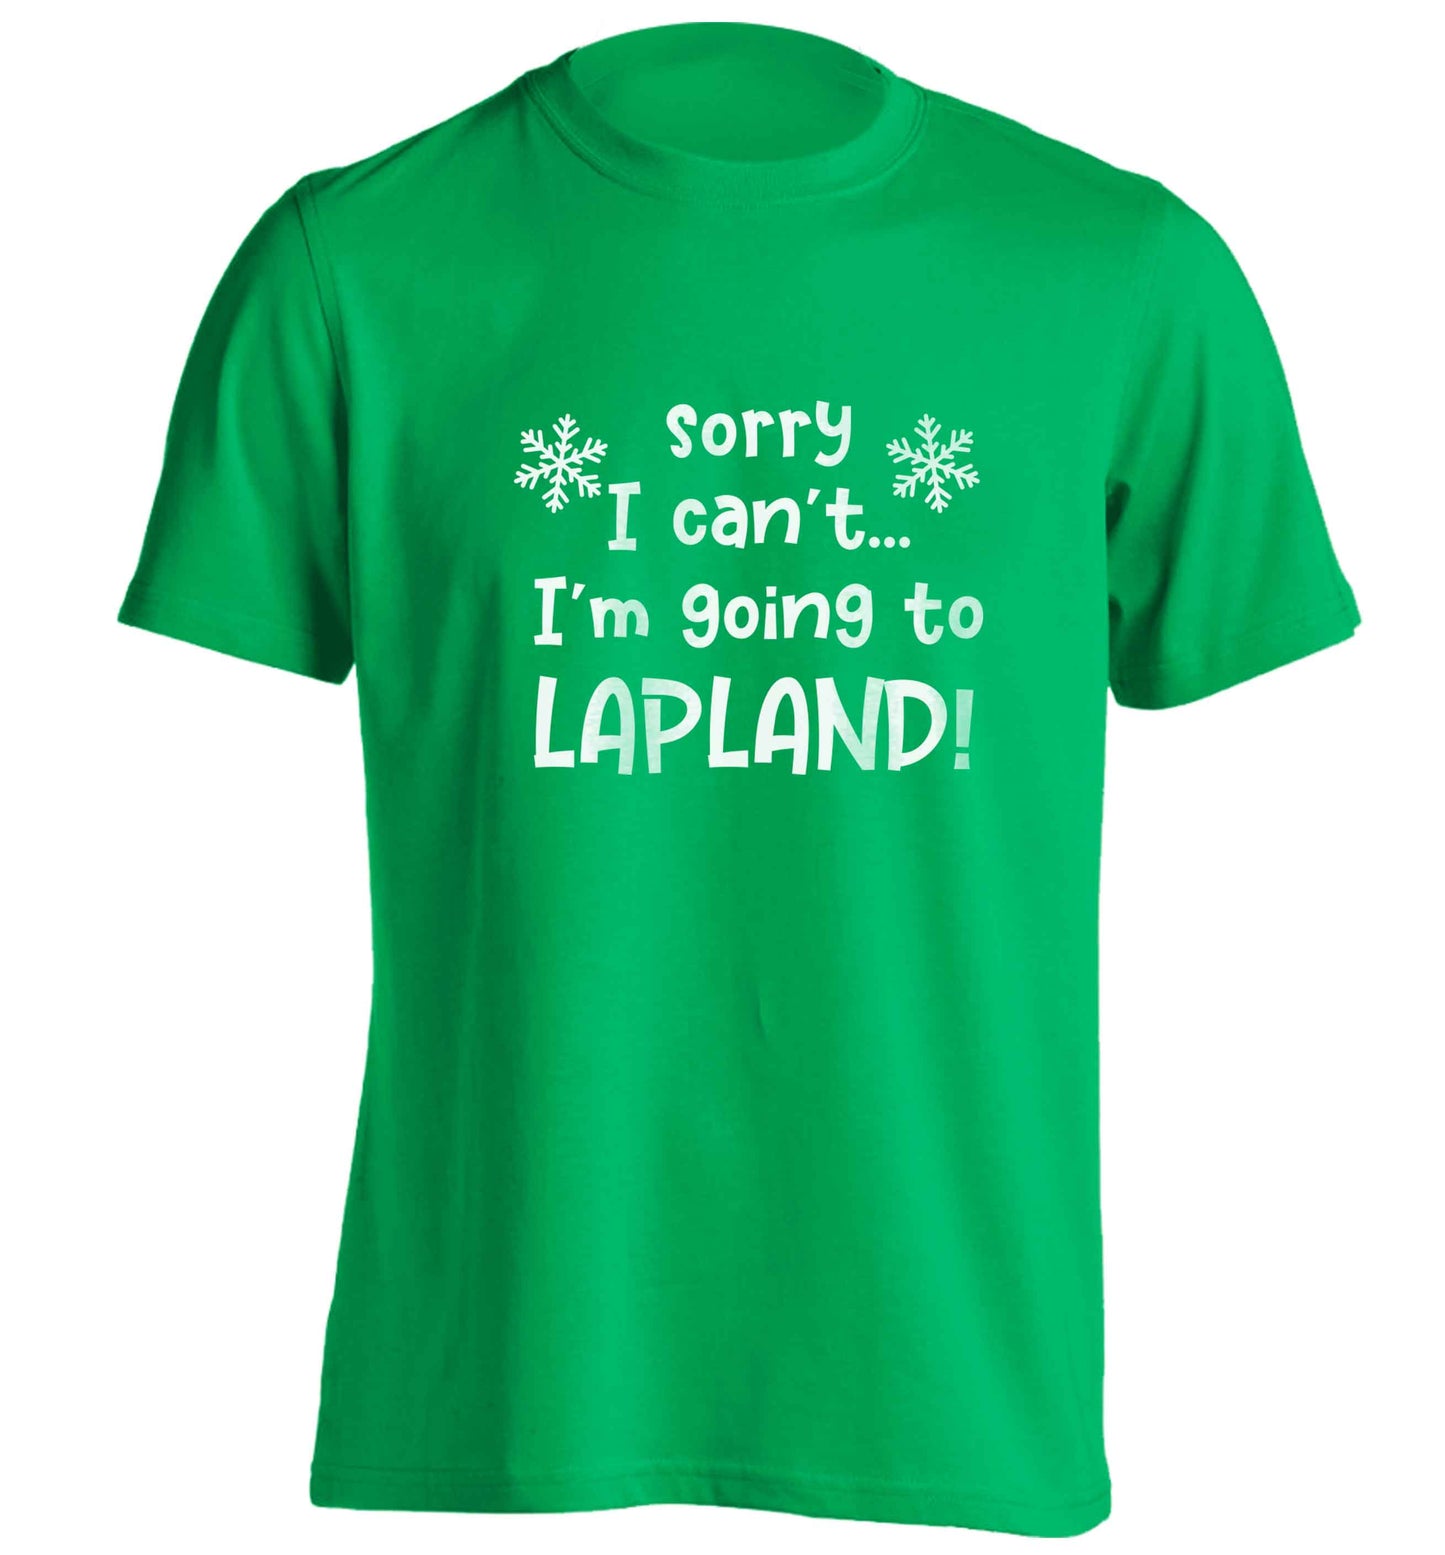 Sorry I can't I'm going to Lapland adults unisex green Tshirt 2XL